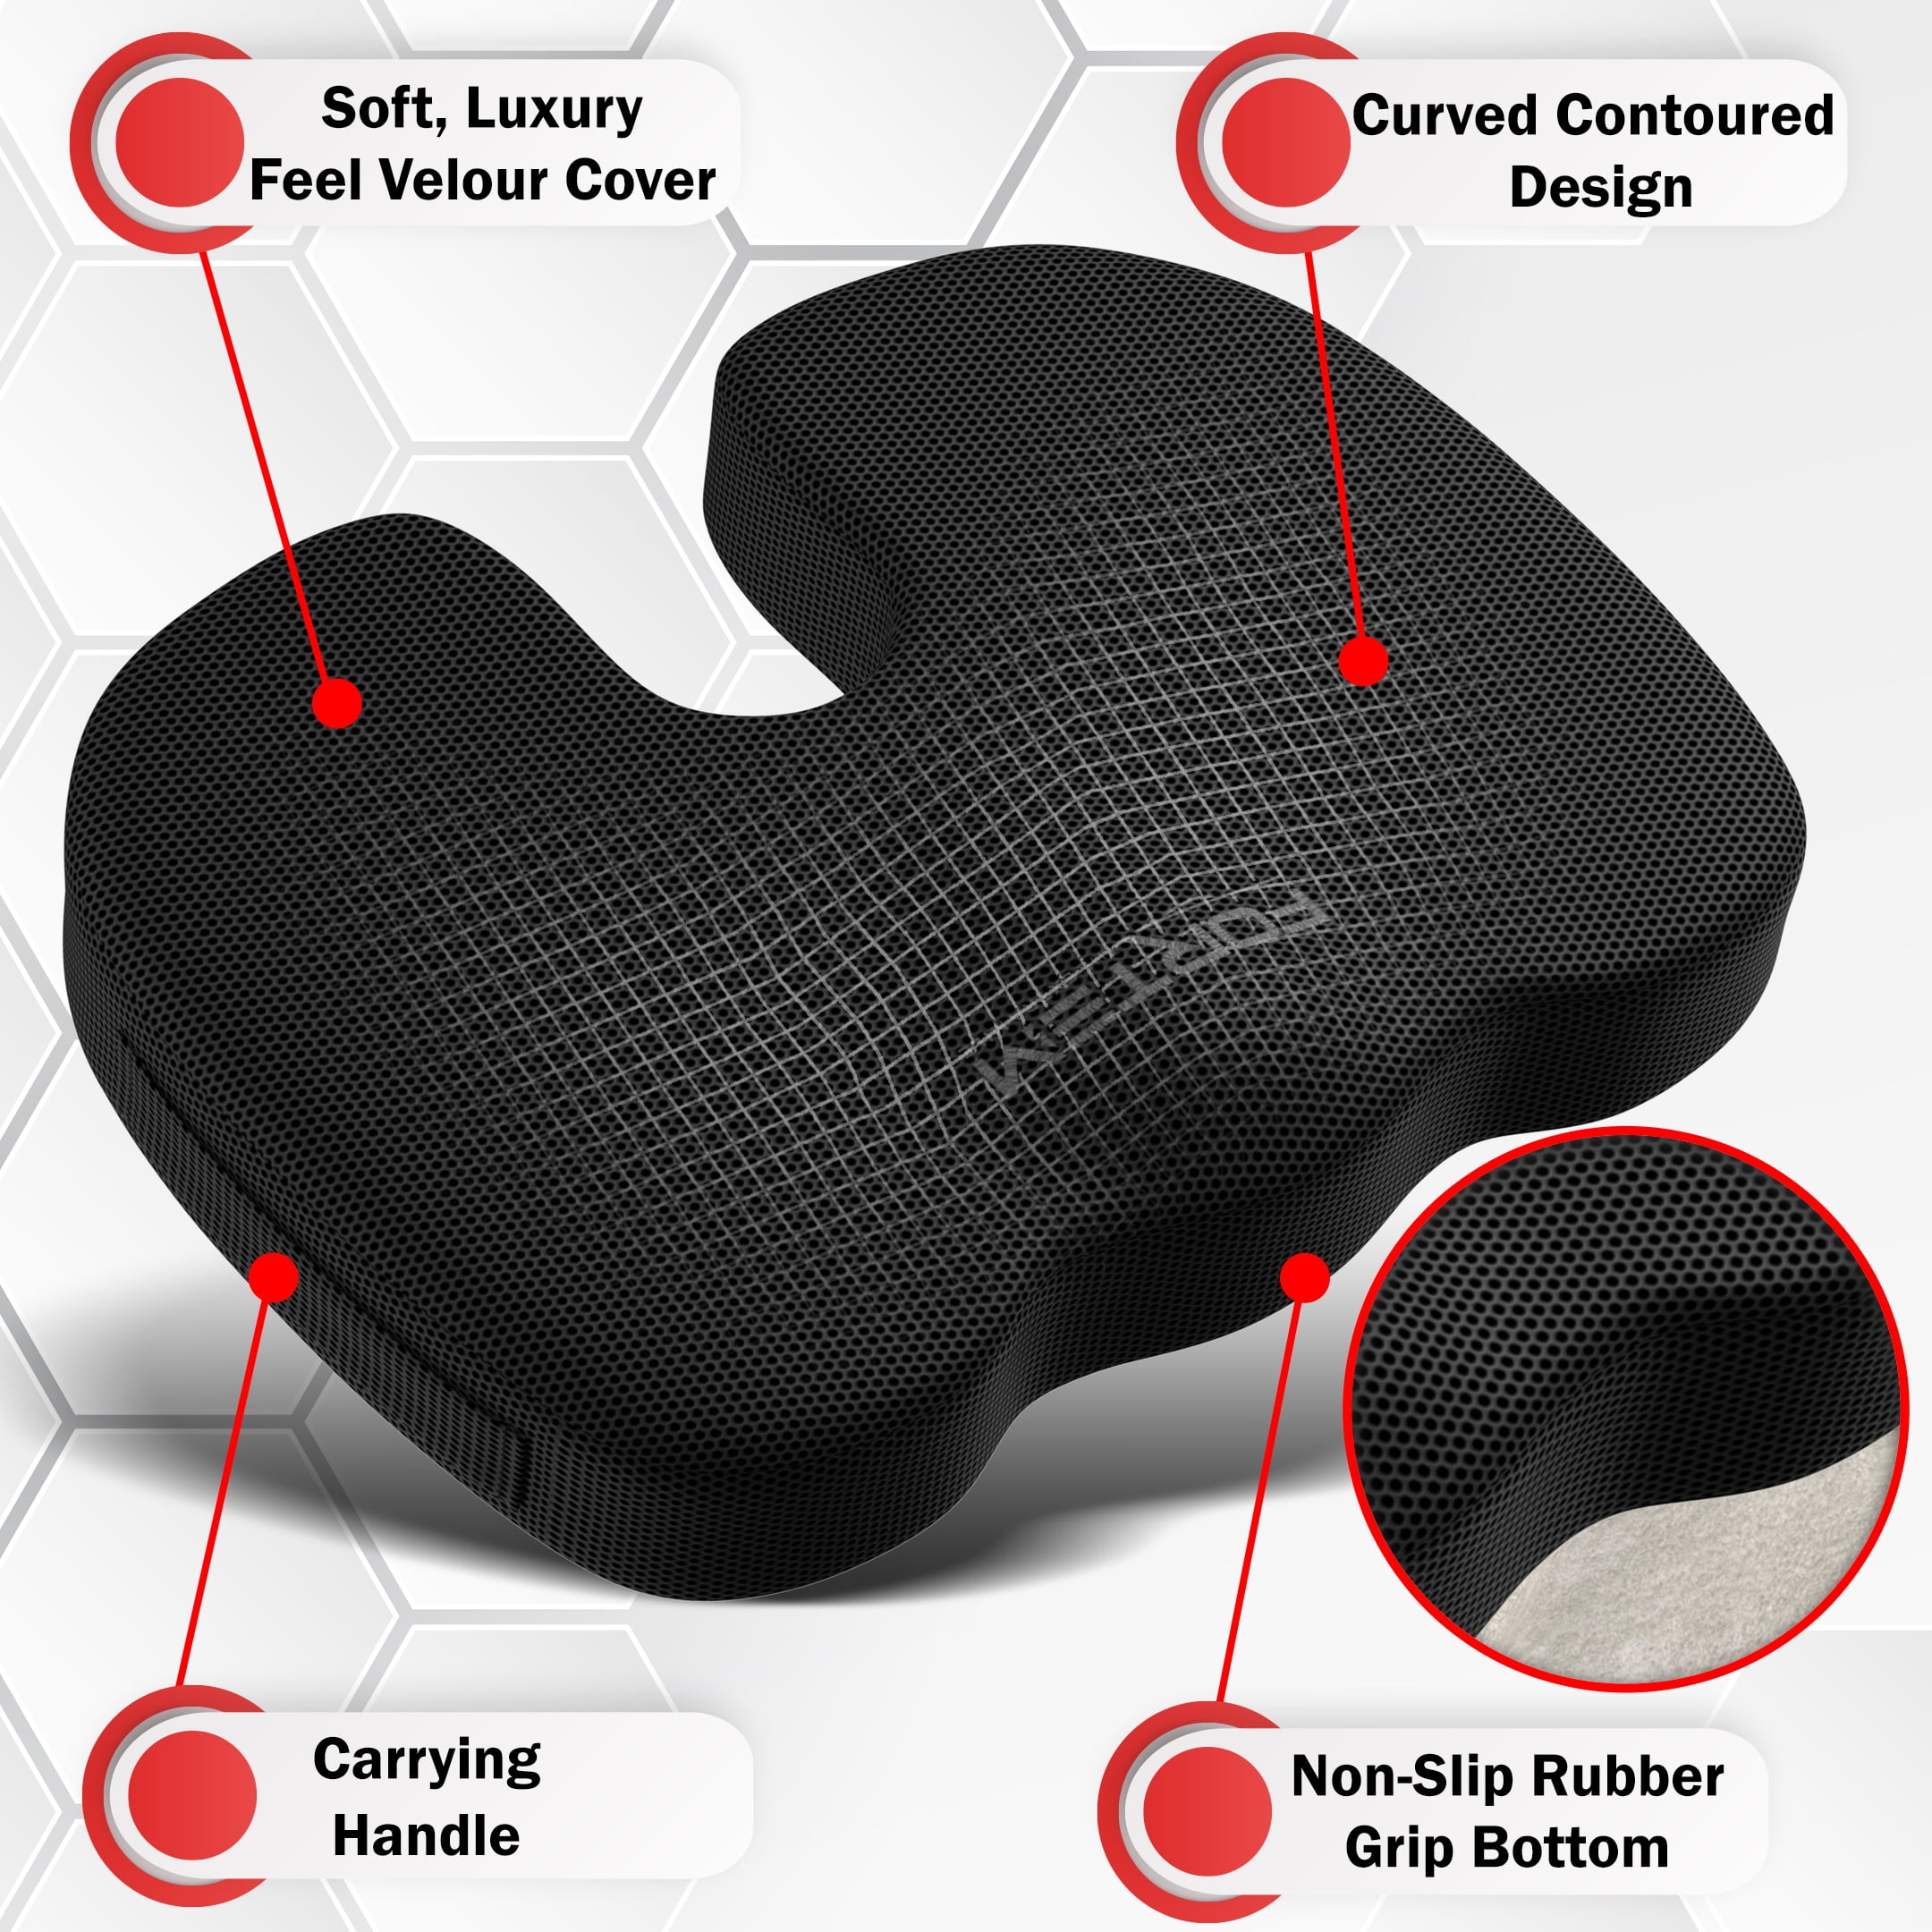 Seat Cushion and Lumbar Support - Fortem